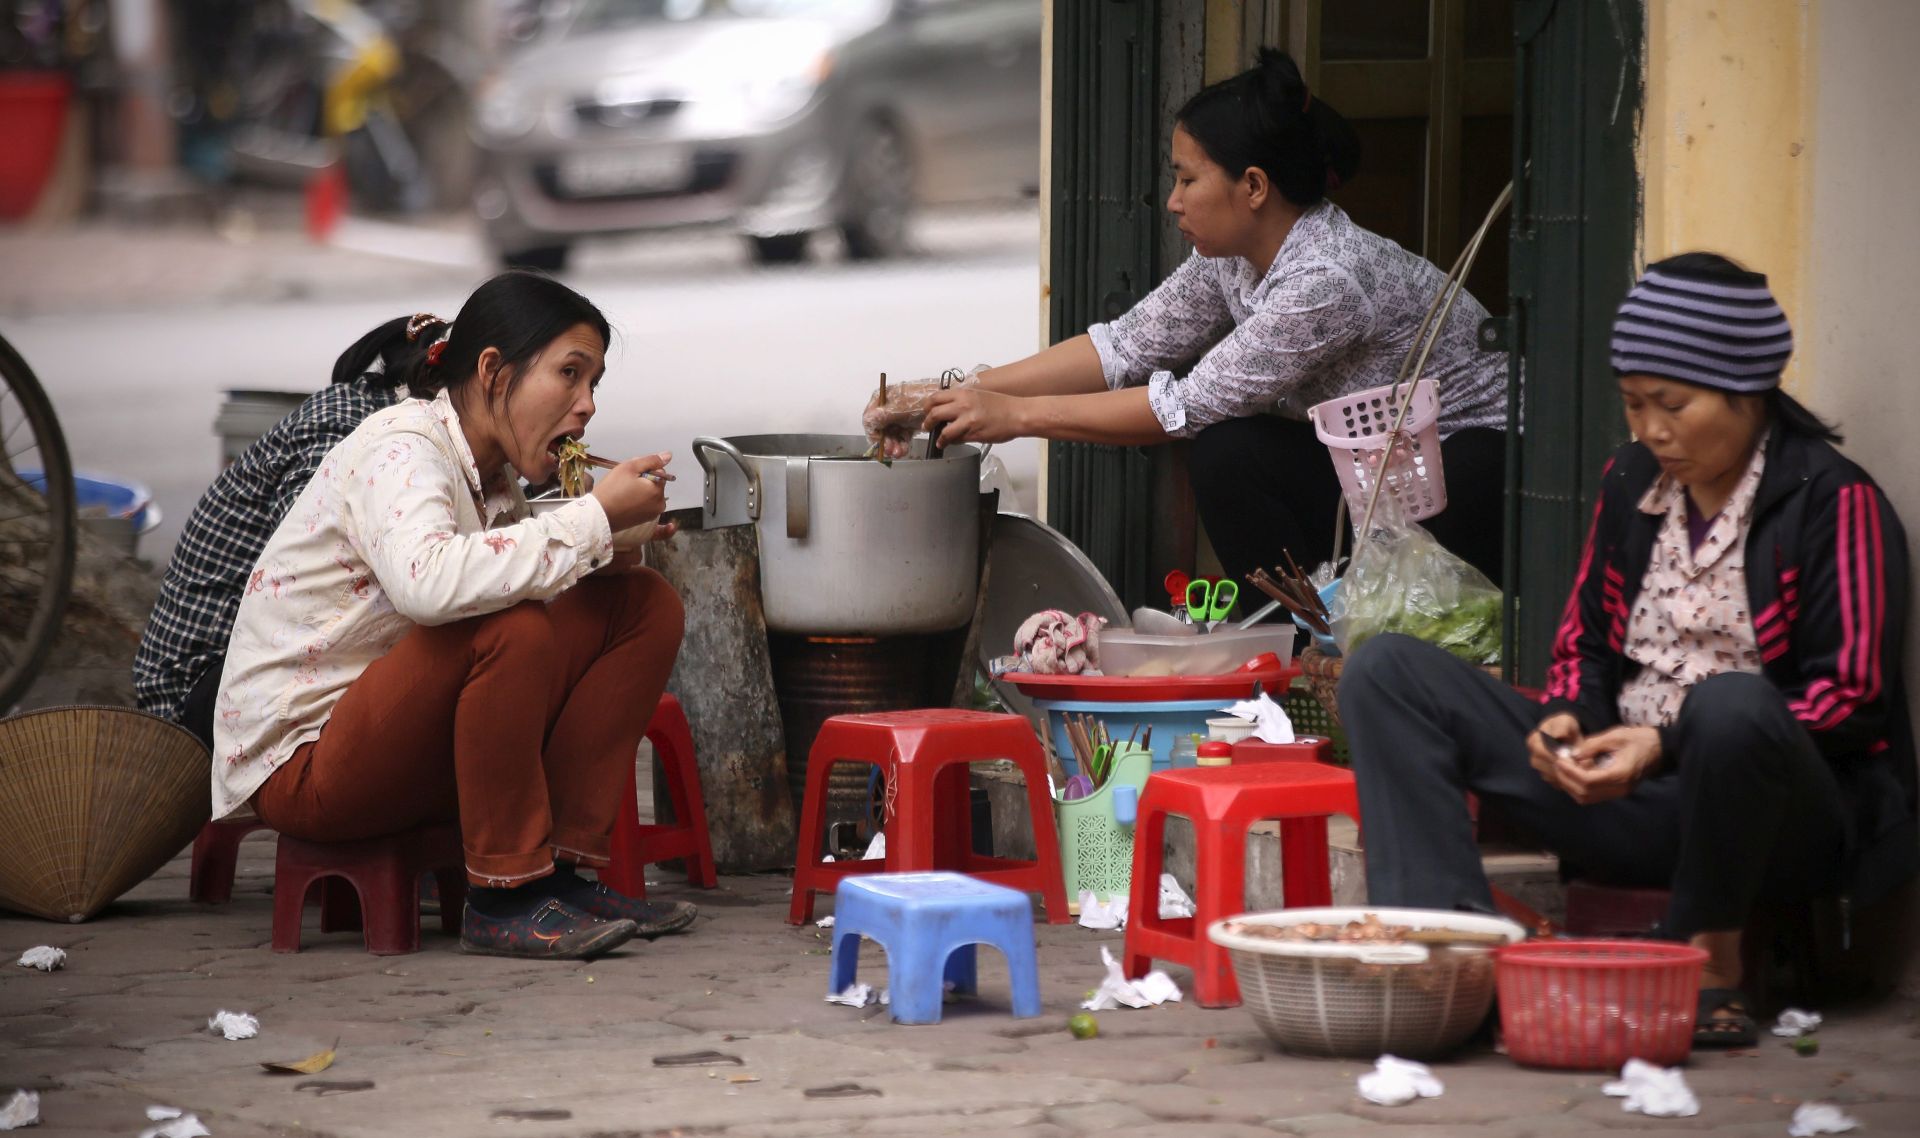 epa04696816 People eat street food at a corner in Hanoi, Vietnam, 09 April 2015. More than 5,000 people had food poisoning in 2014, according to data from the World Health Organization (WHO). WHO has urged for more actions to warrant food safety in Vietnam.  EPA/LUONG THAI LINH